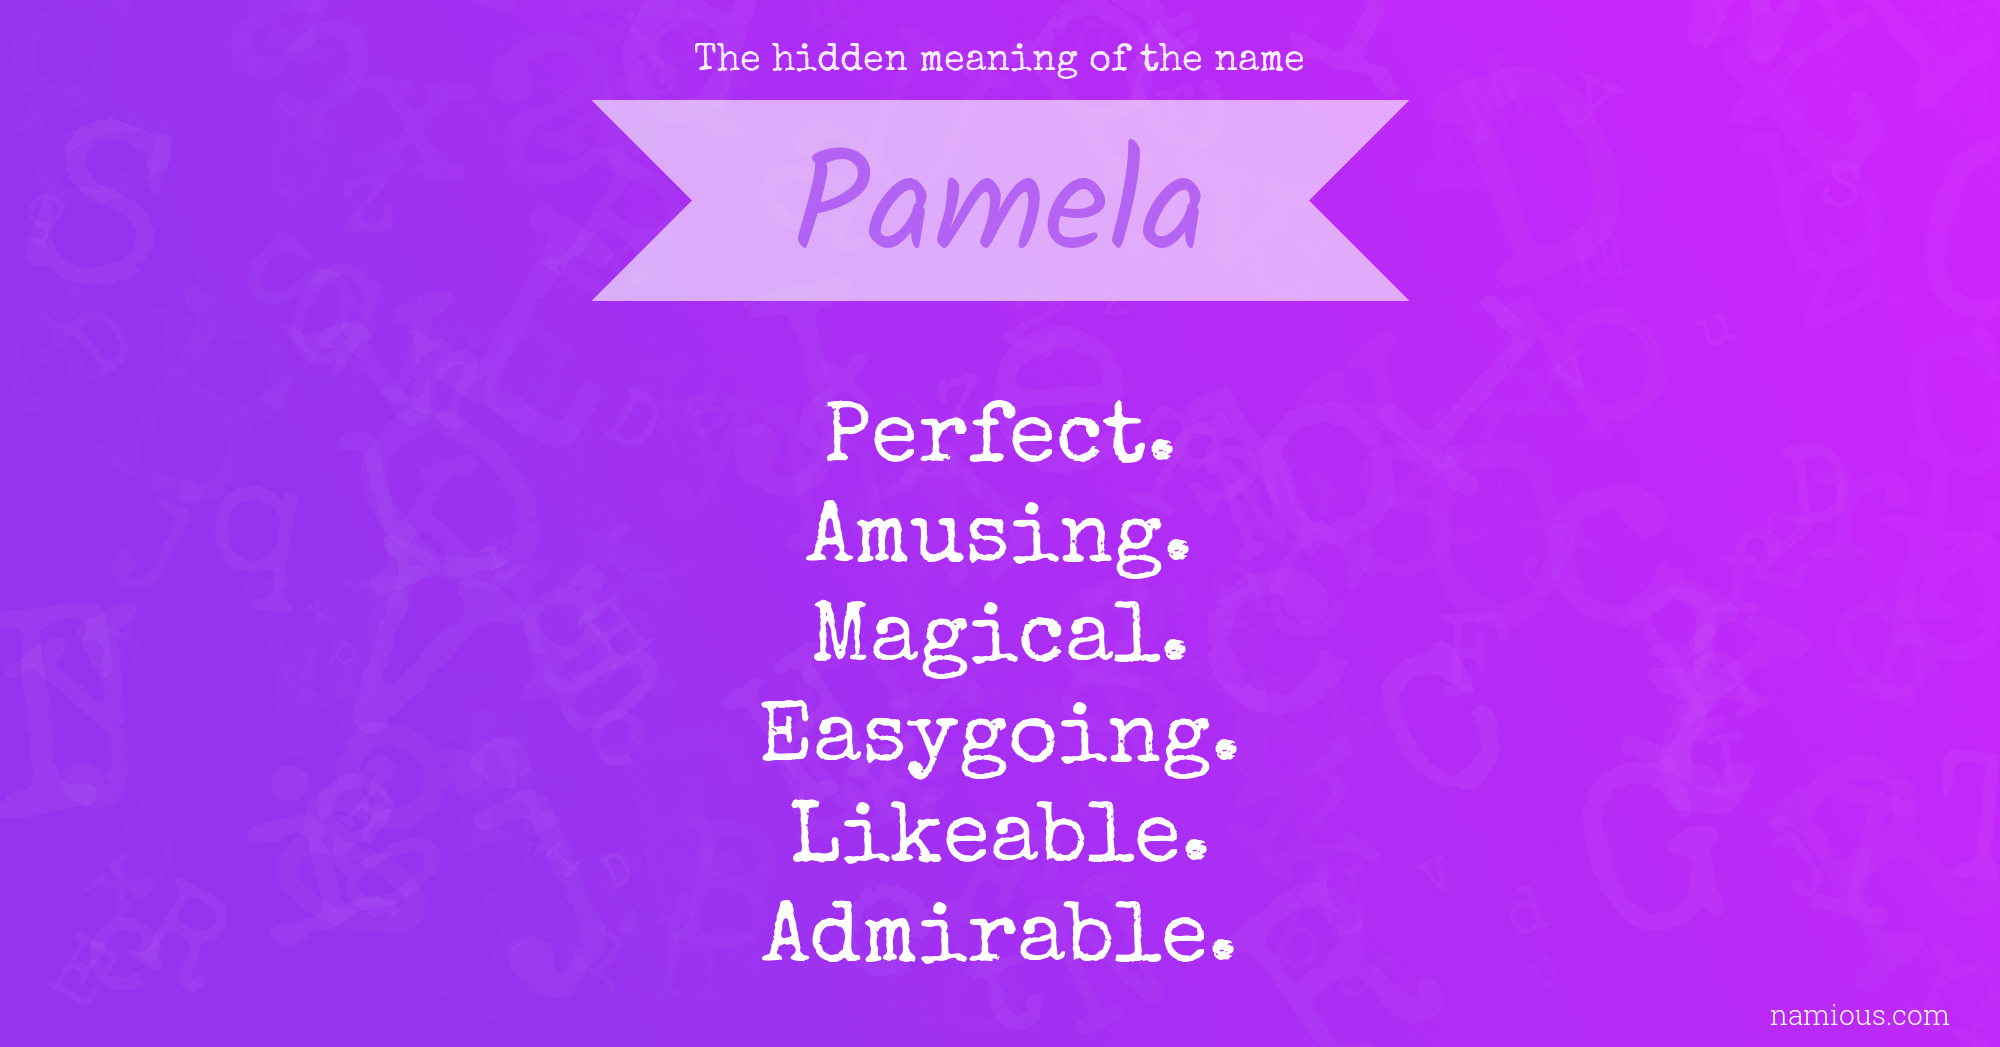 The hidden meaning of the name Pamela